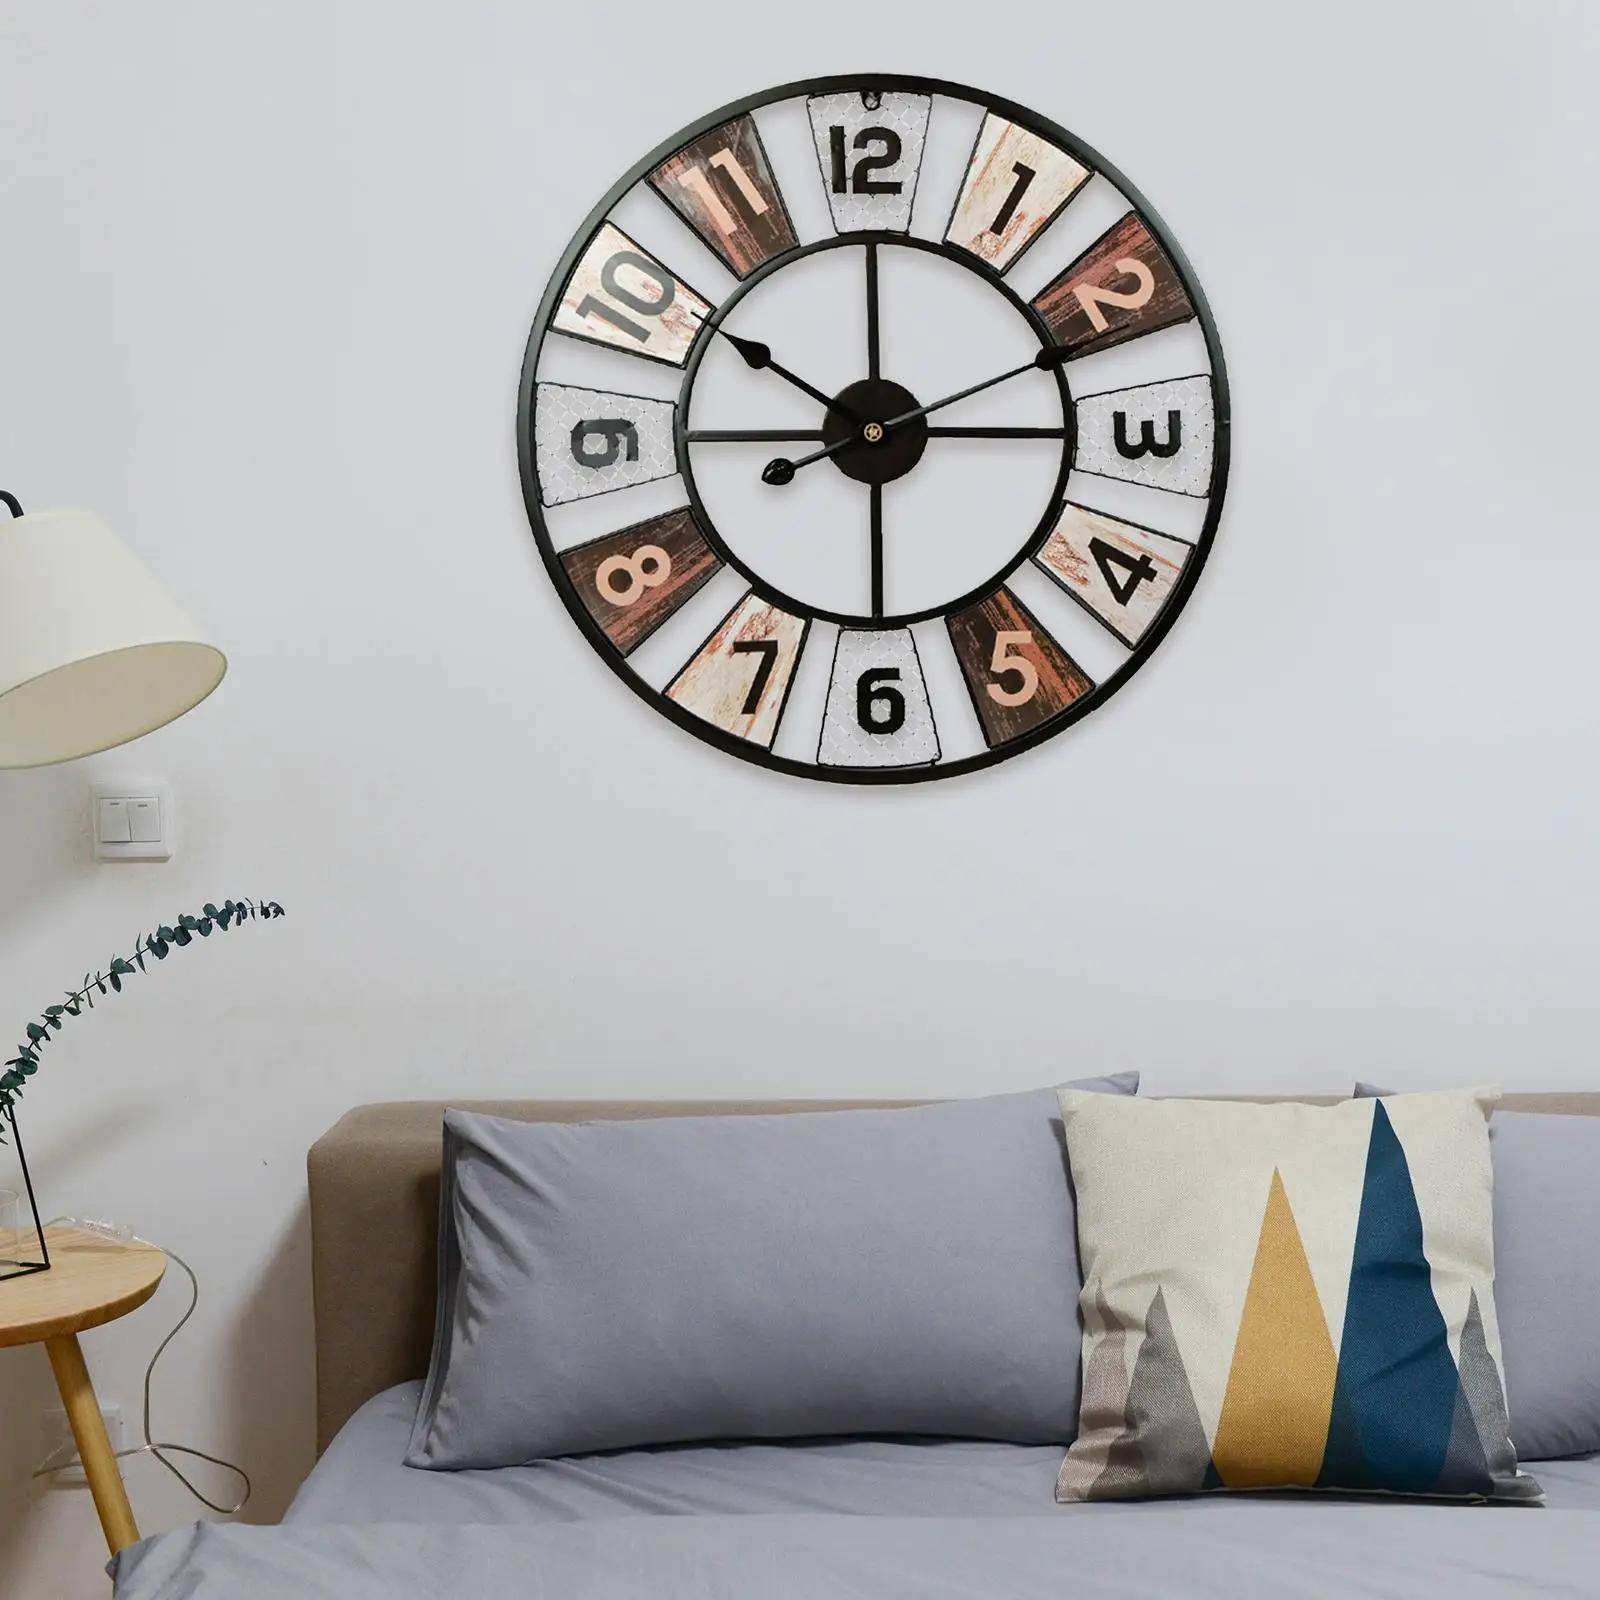 Vintage Style Large Wall Clock 24Inches Circular Hanging Clocks Decorative Clocks for Office Bedroom Cafe Shop Hotel Decoration